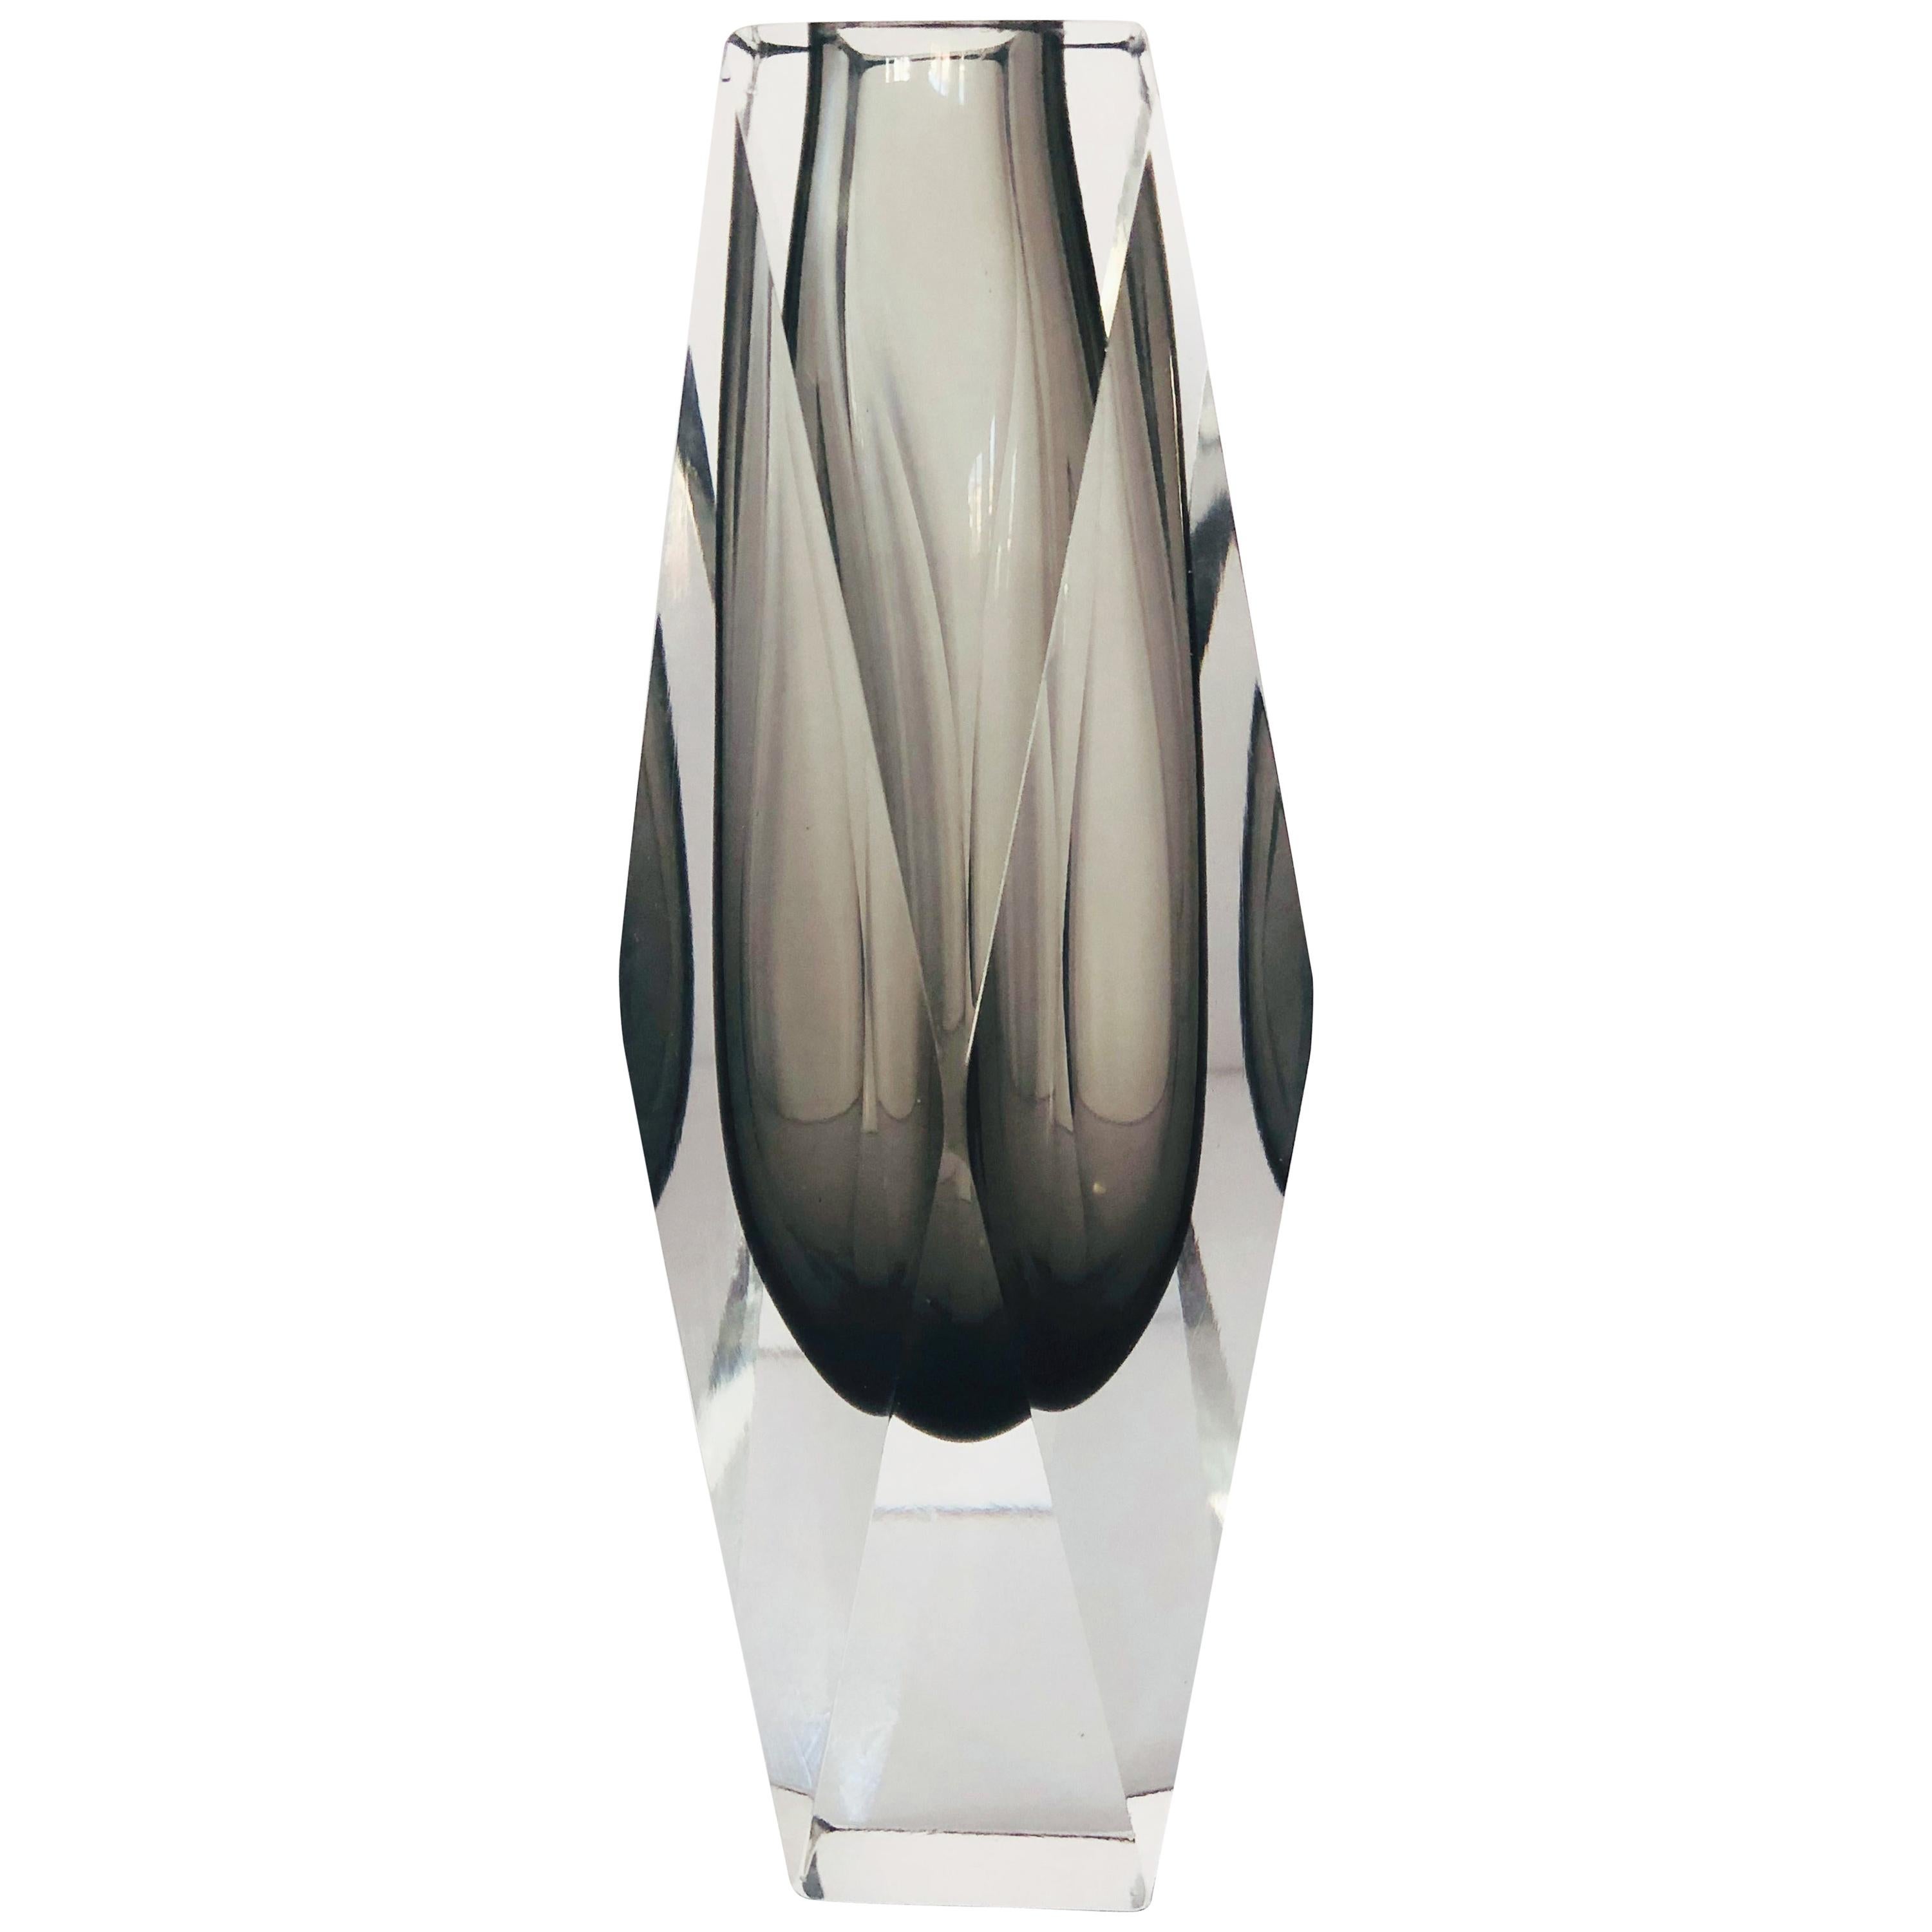 Smoky Faceted Sommerso Vase by Mandruzzato FINAL CLEARANCE SALE